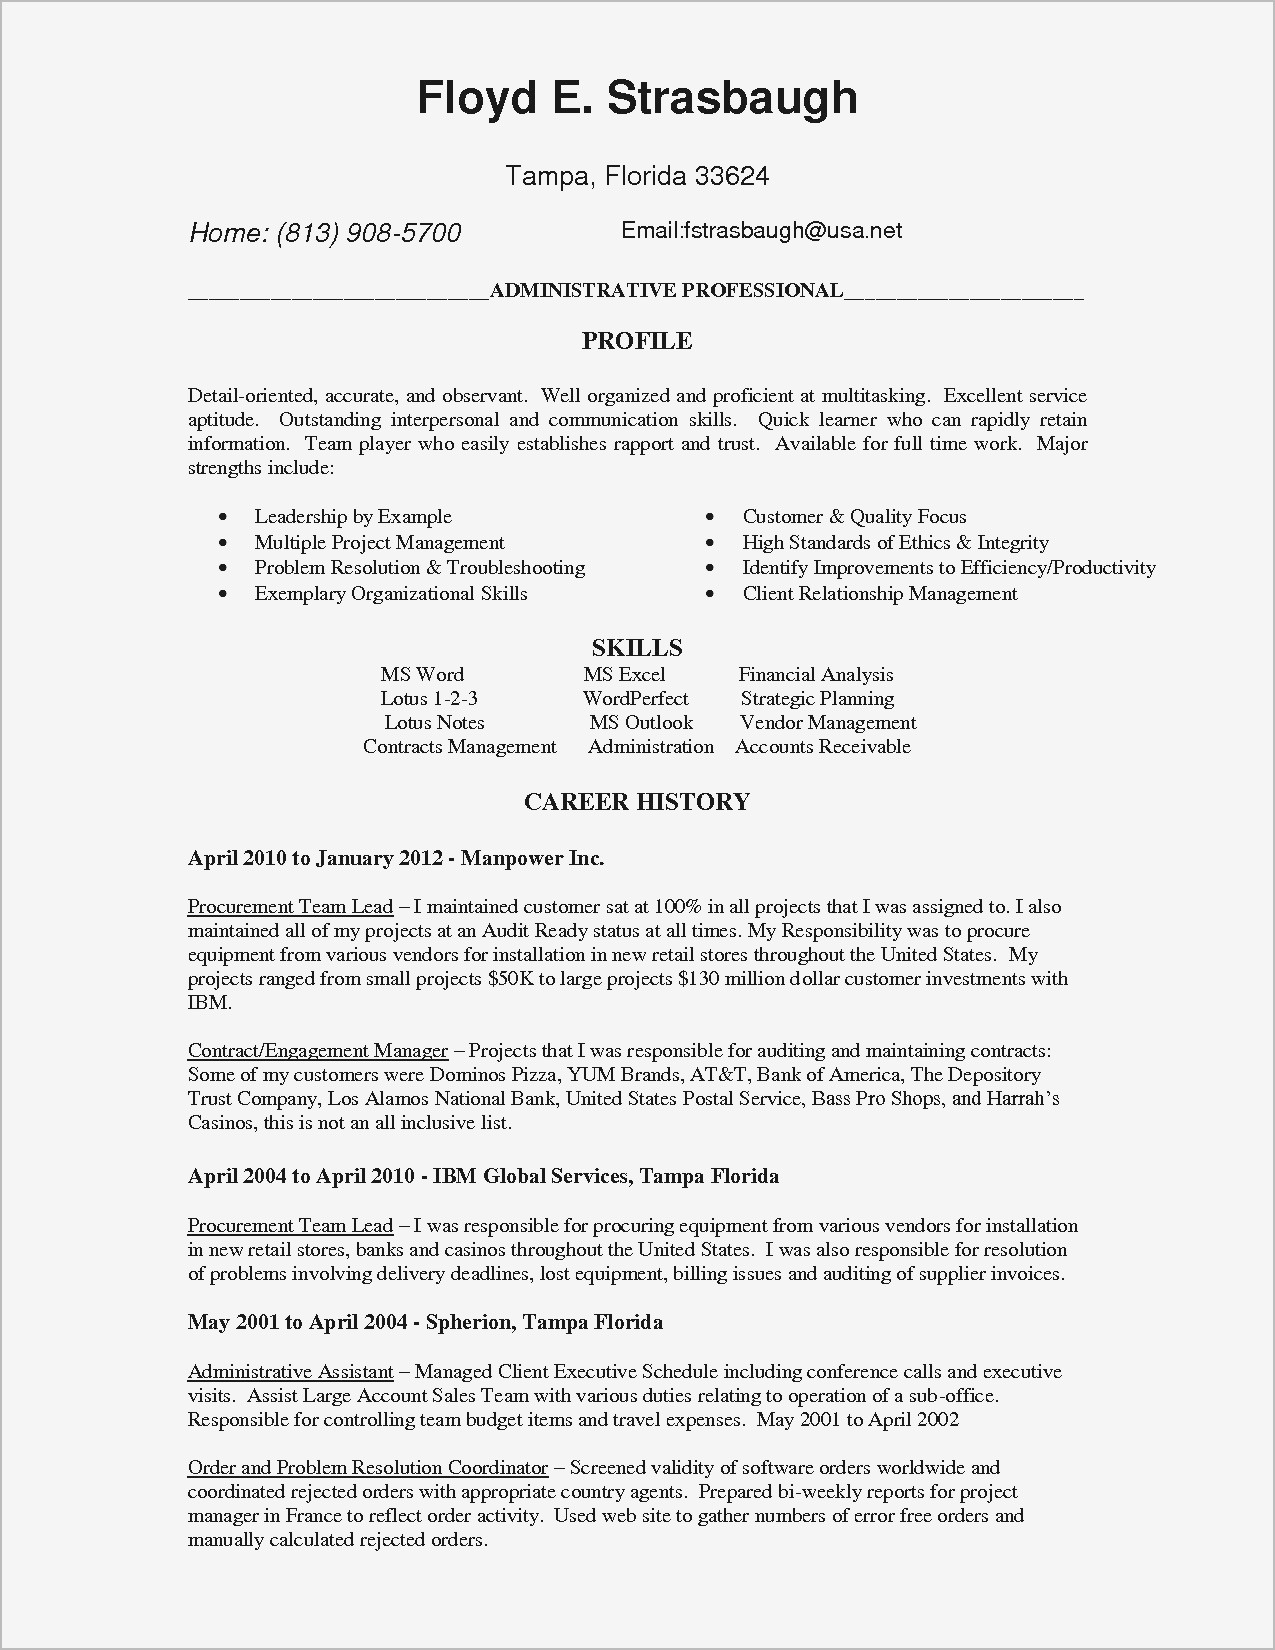 Application Letter Template Word - Cover Letter Template for Resume Pdf format